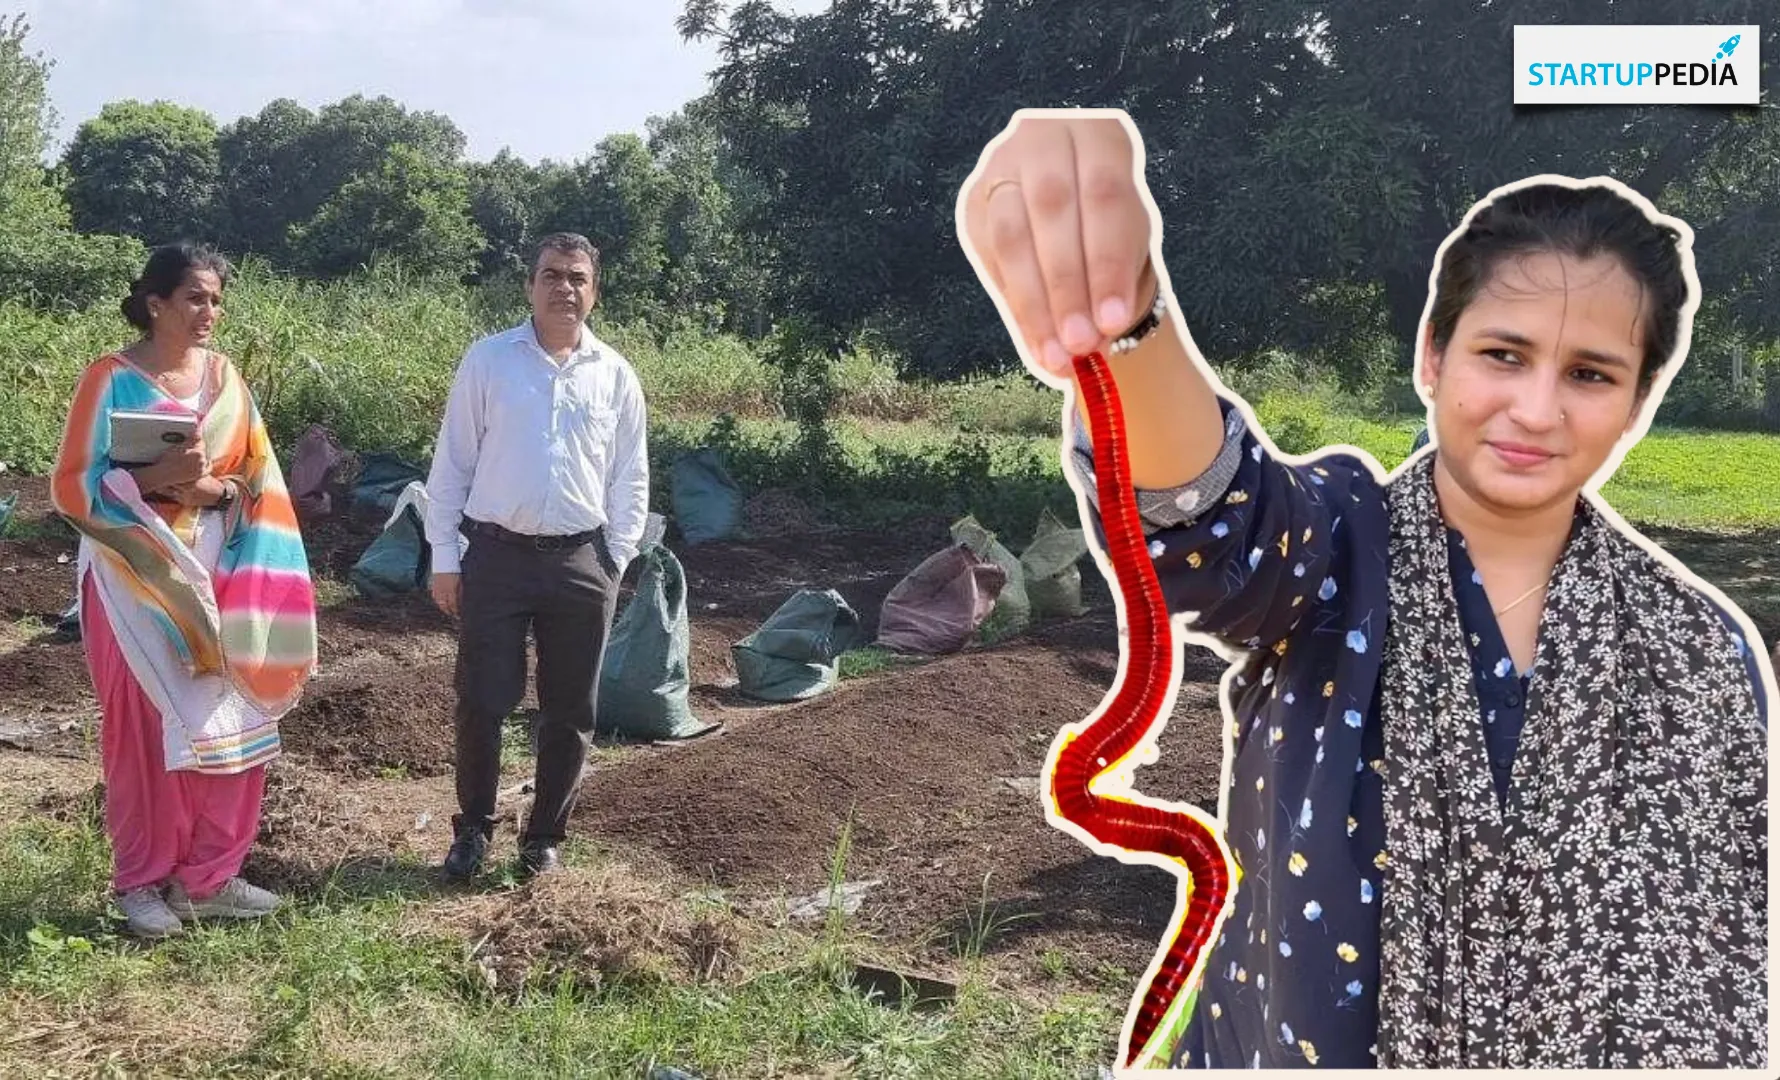 Meerut-based woman entrepreneur’s agrictech startup converts dairy and household waste into vermicompost – earns Rs 1 crore annually.